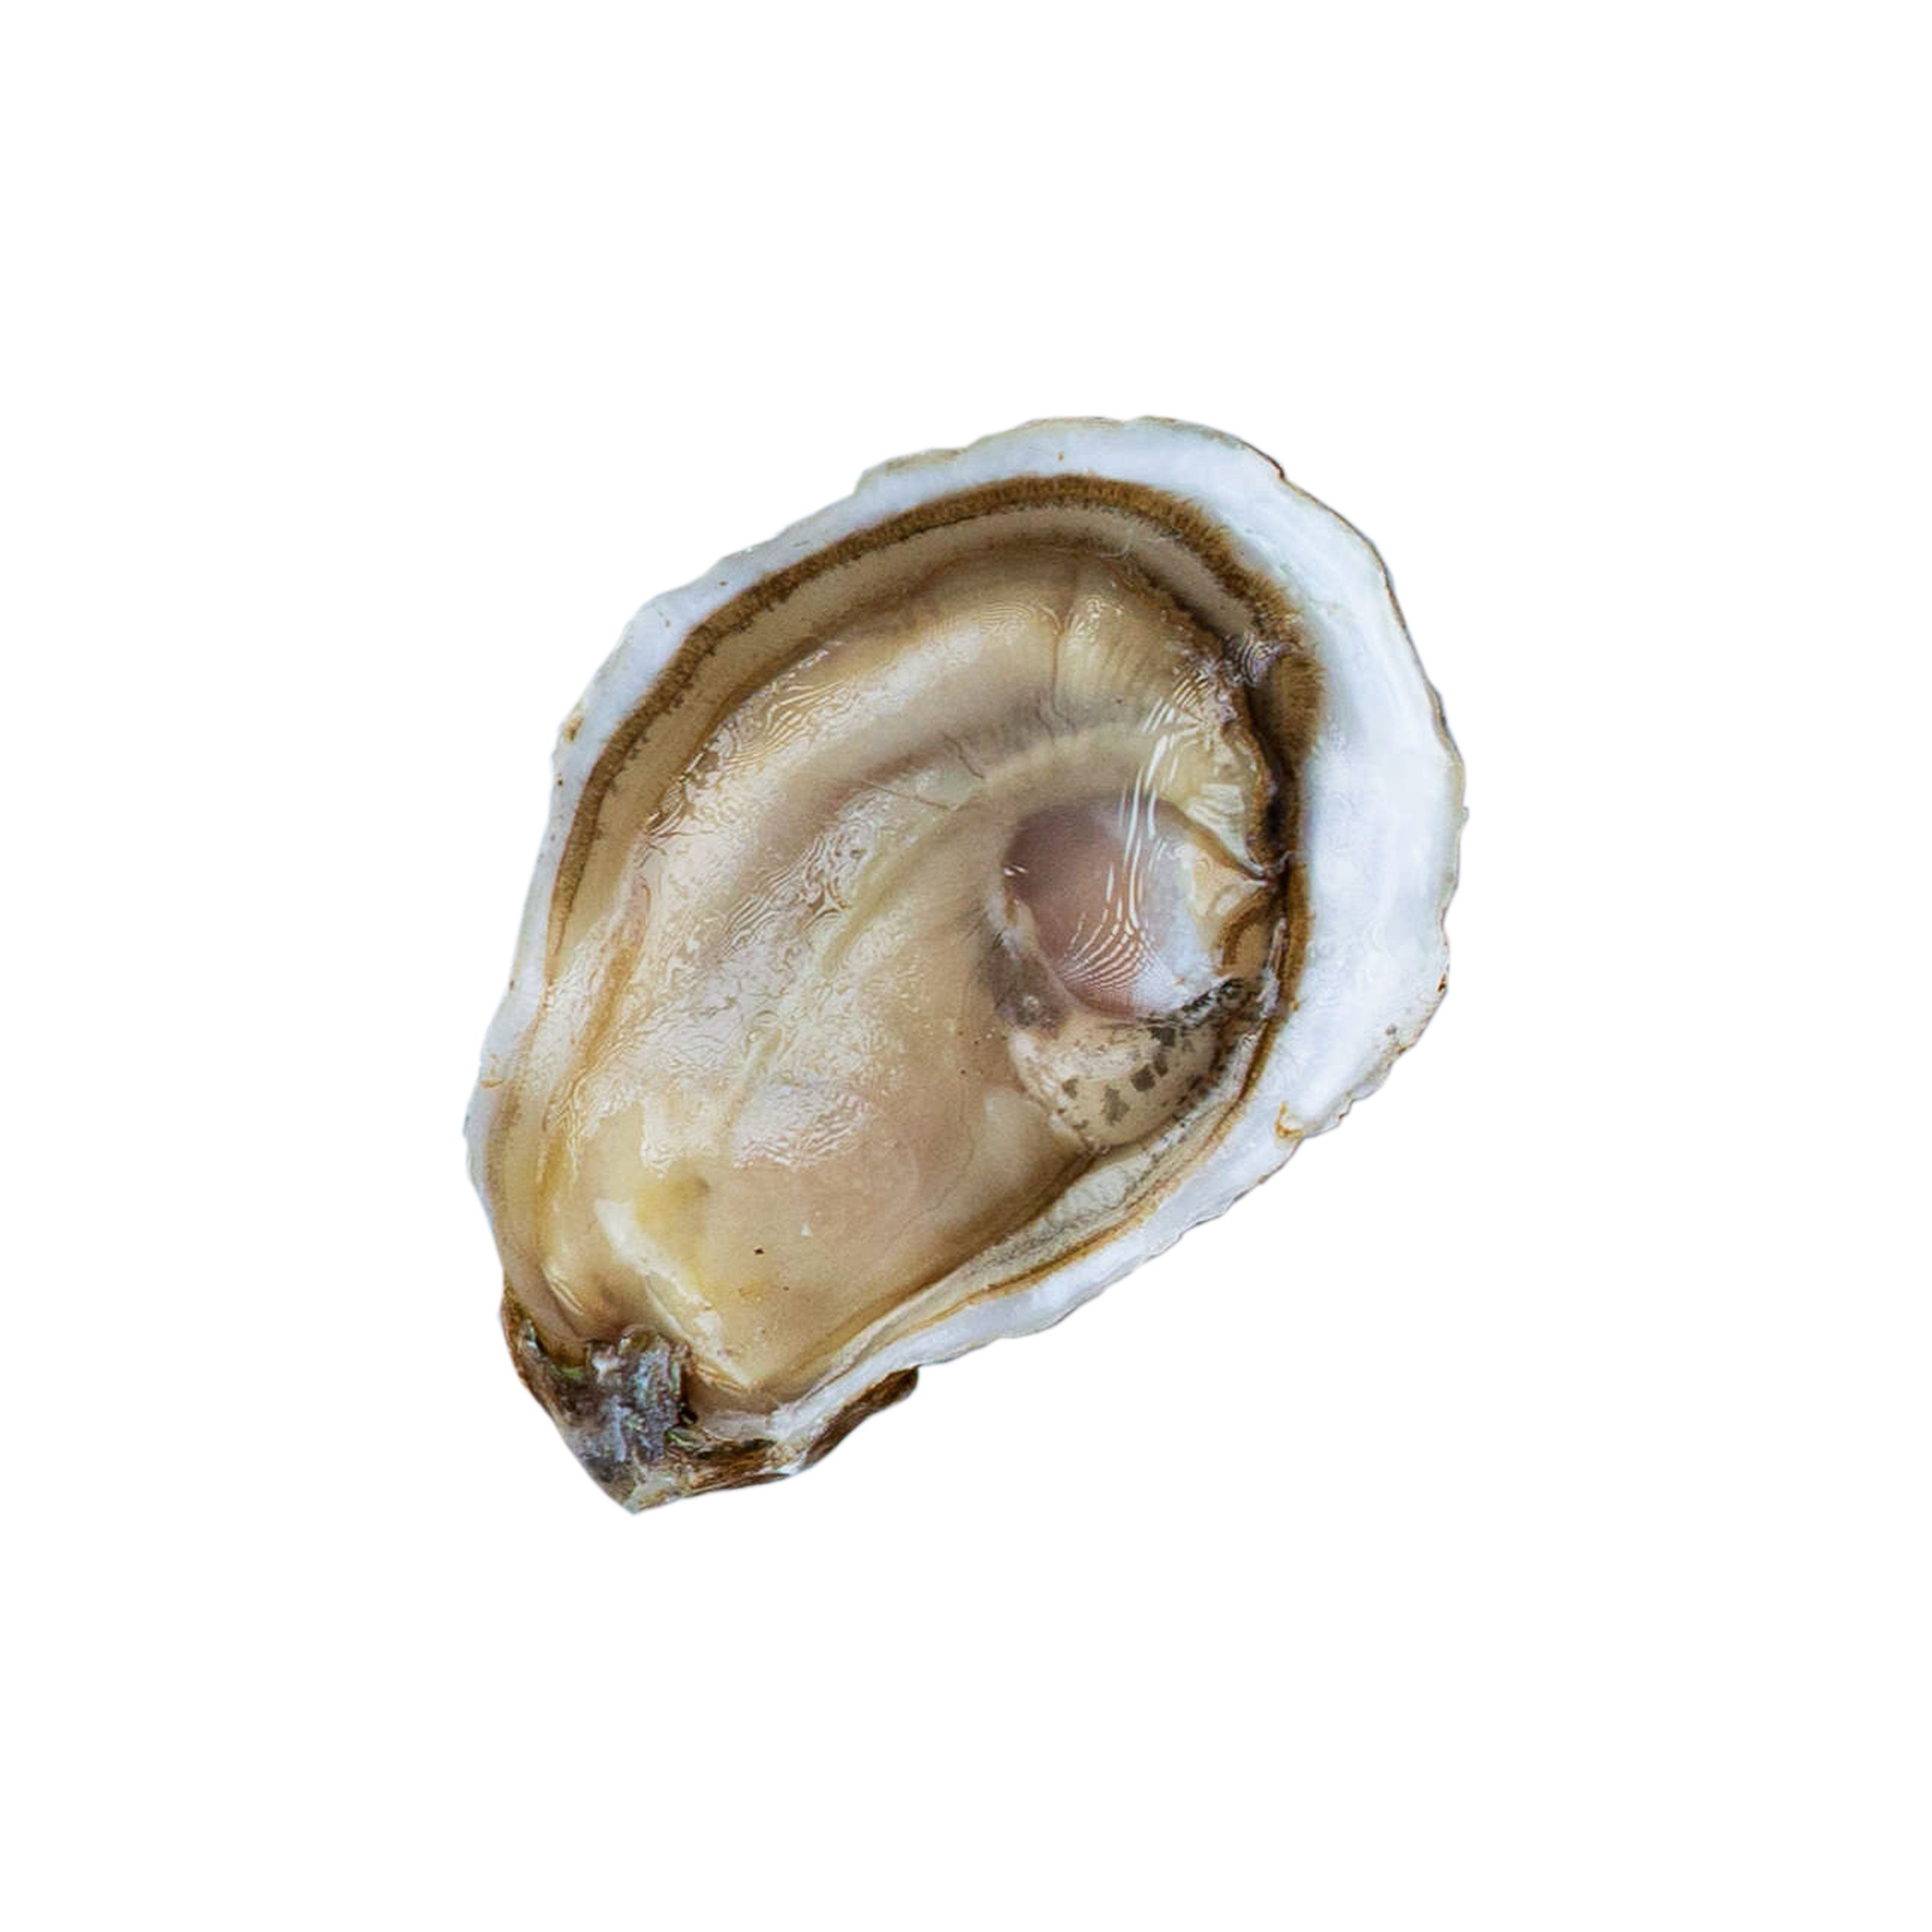 Chelsea "Gem" Oysters